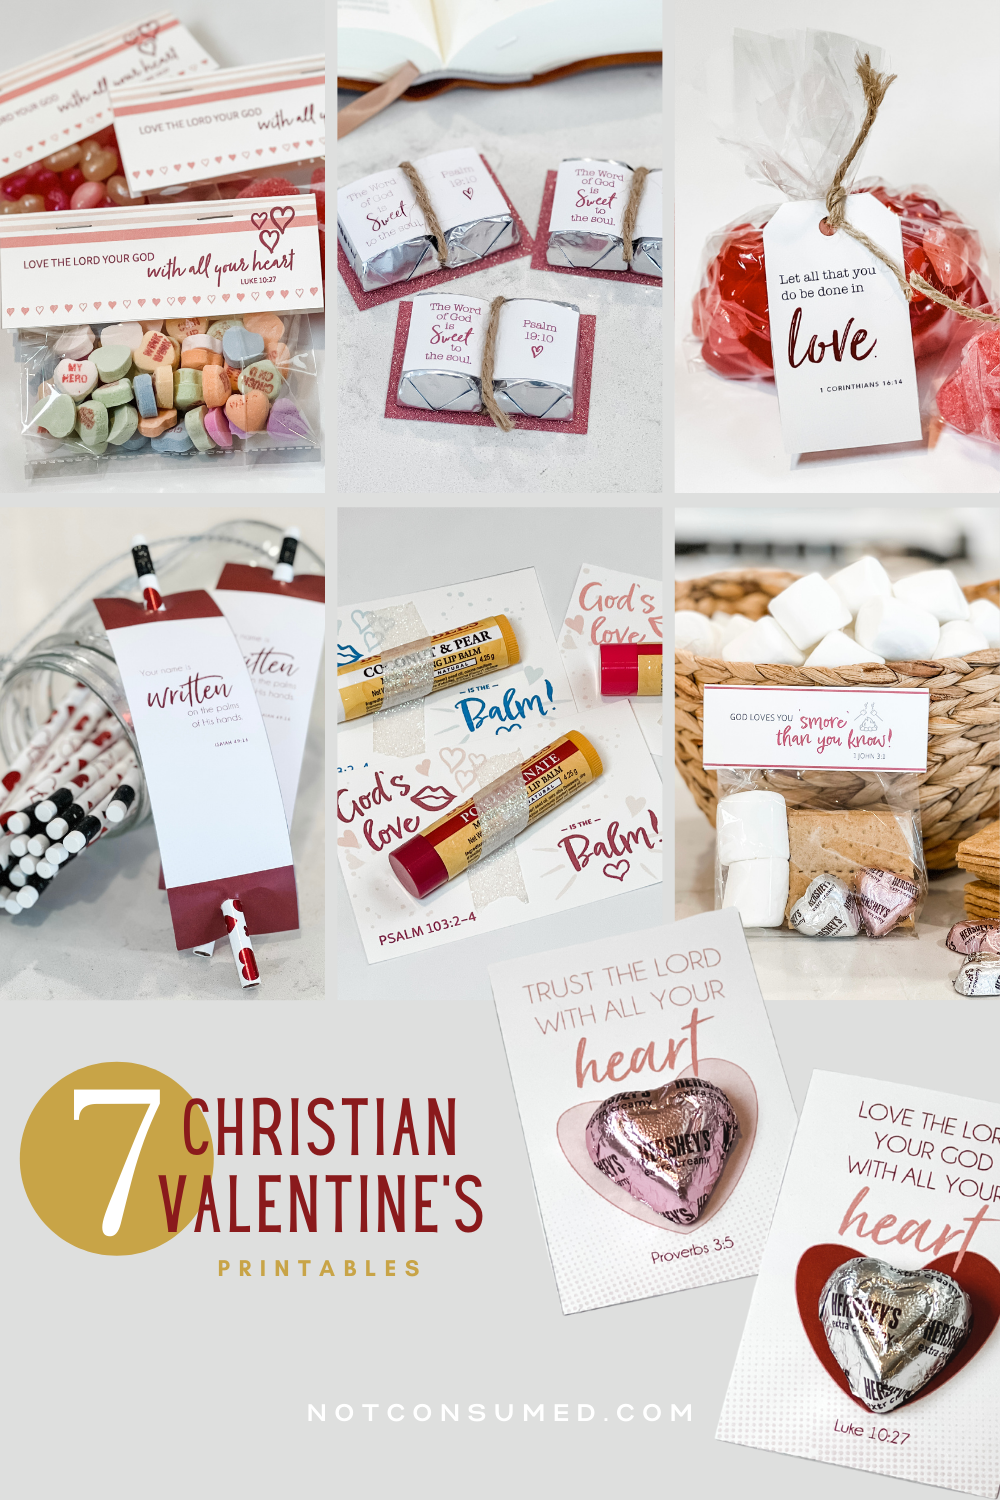 The 15 Best (Totally Free) Classroom Valentine Printables - A Mom's Take